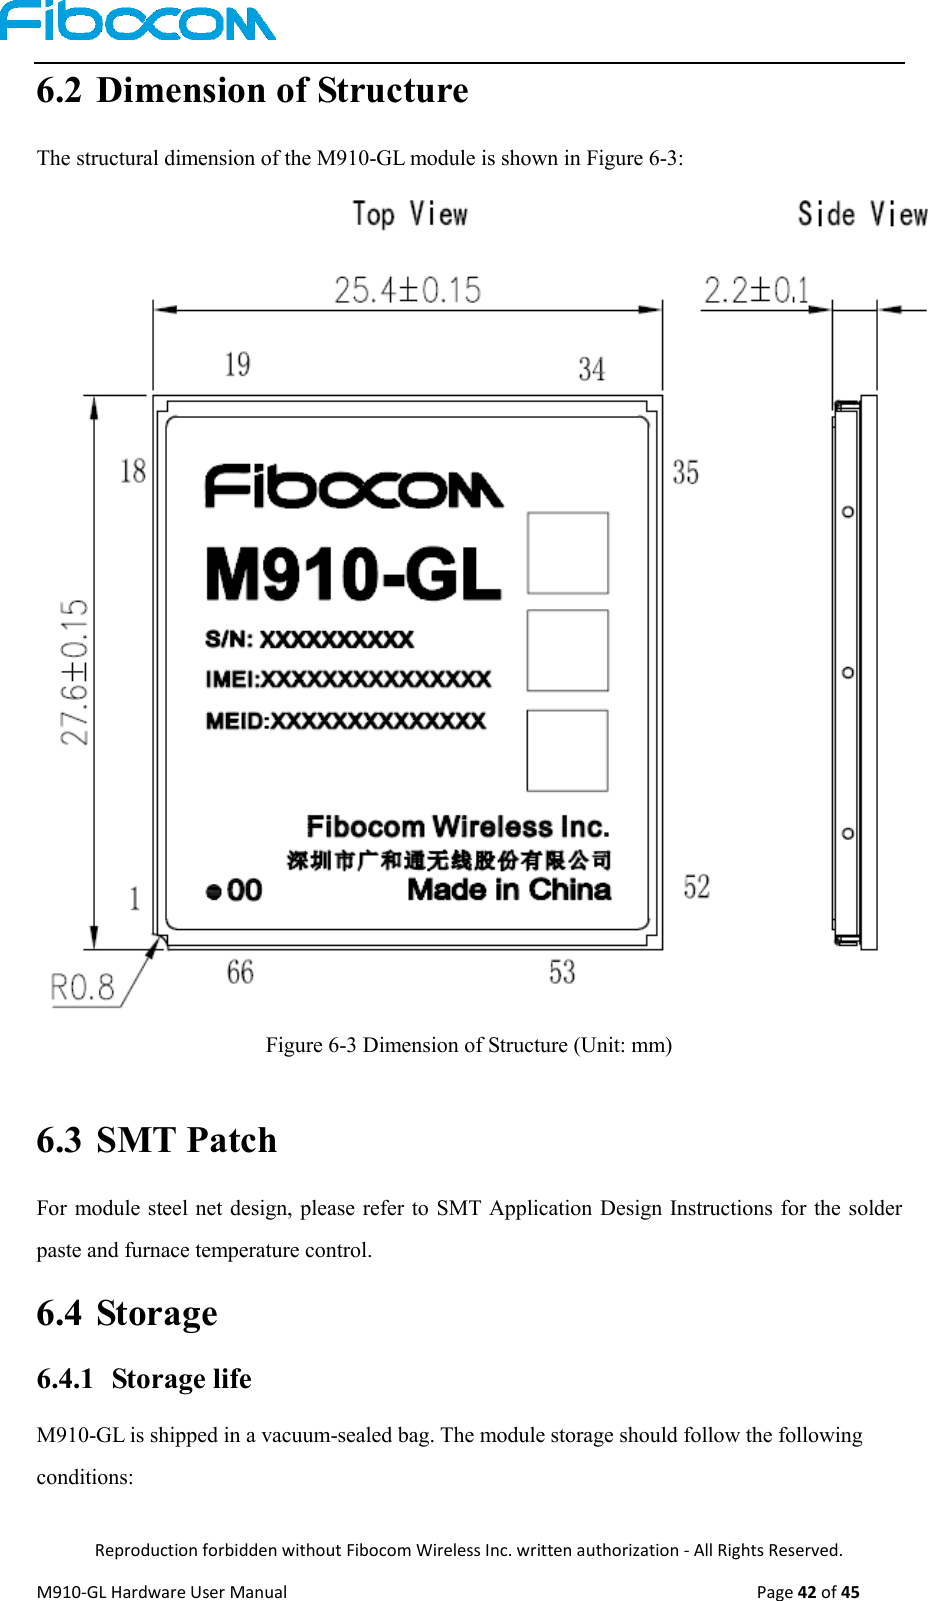  Reproduction forbidden without Fibocom Wireless Inc. written authorization - All Rights Reserved. M910-GL Hardware User Manual                                                                                                  Page 42 of 45  6.2 Dimension of Structure The structural dimension of the M910-GL module is shown in Figure 6-3:  Figure 6-3 Dimension of Structure (Unit: mm)  6.3 SMT Patch     For module steel net design, please refer to SMT Application Design Instructions for the solder paste and furnace temperature control. 6.4 Storage 6.4.1 Storage life M910-GL is shipped in a vacuum-sealed bag. The module storage should follow the following conditions: 